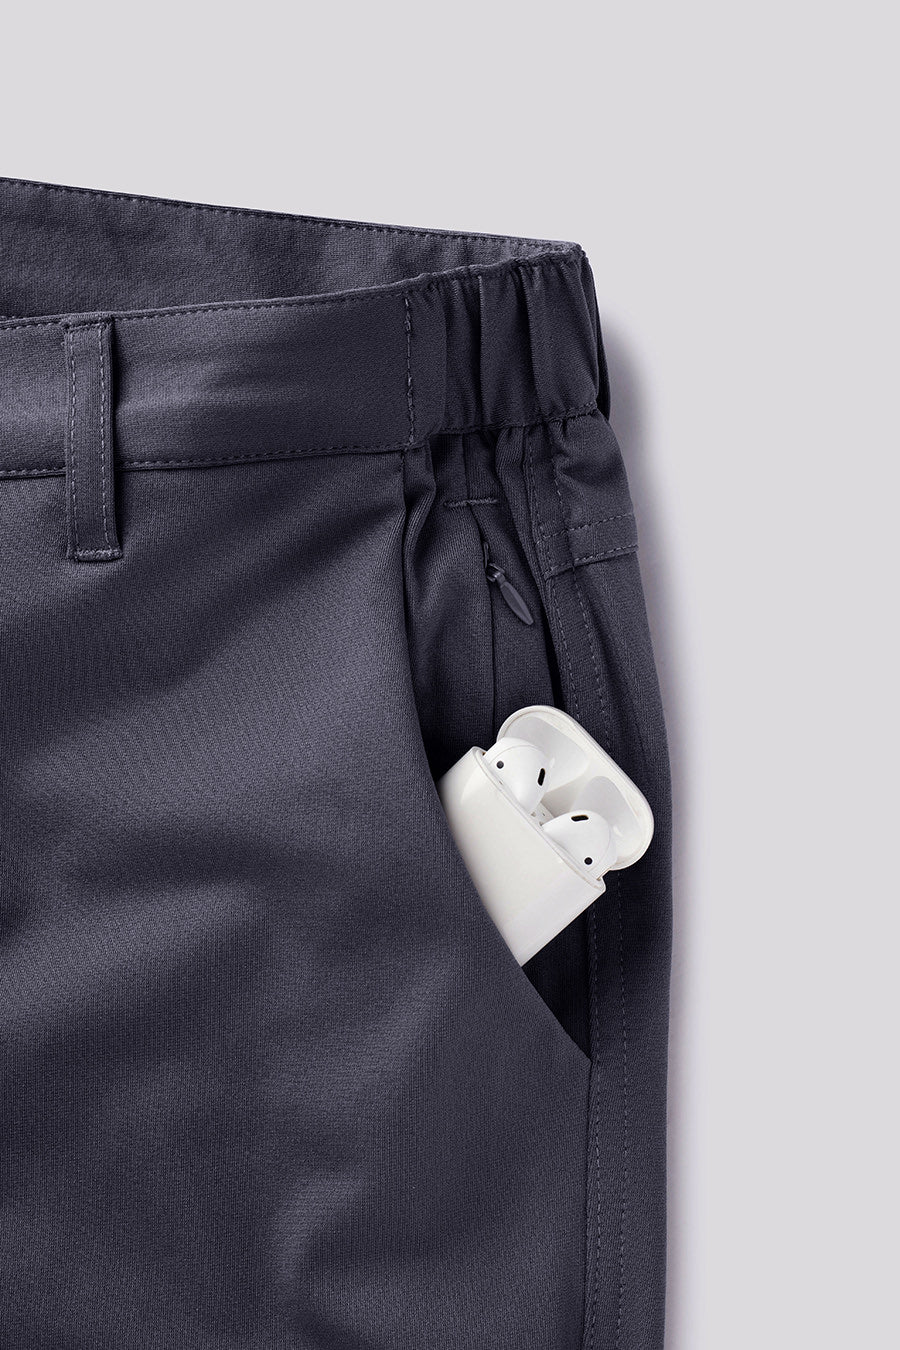 Anything Dress Pant Slim - Navy - photo from pocket #color_navy